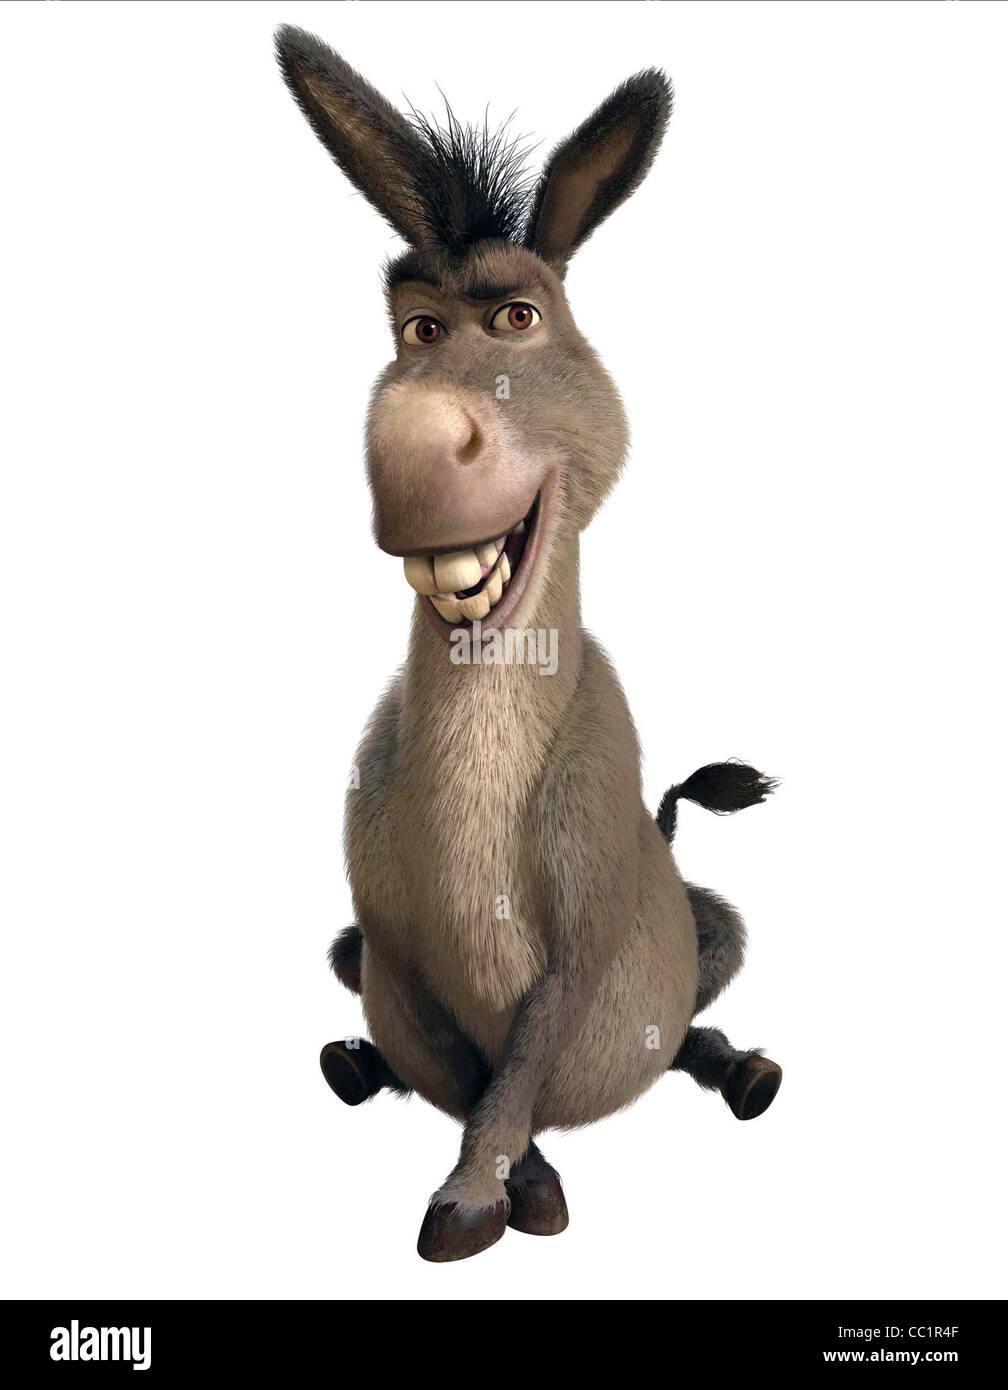 Shrek And Donkey High Resolution Stock Photography and Images - Alamy